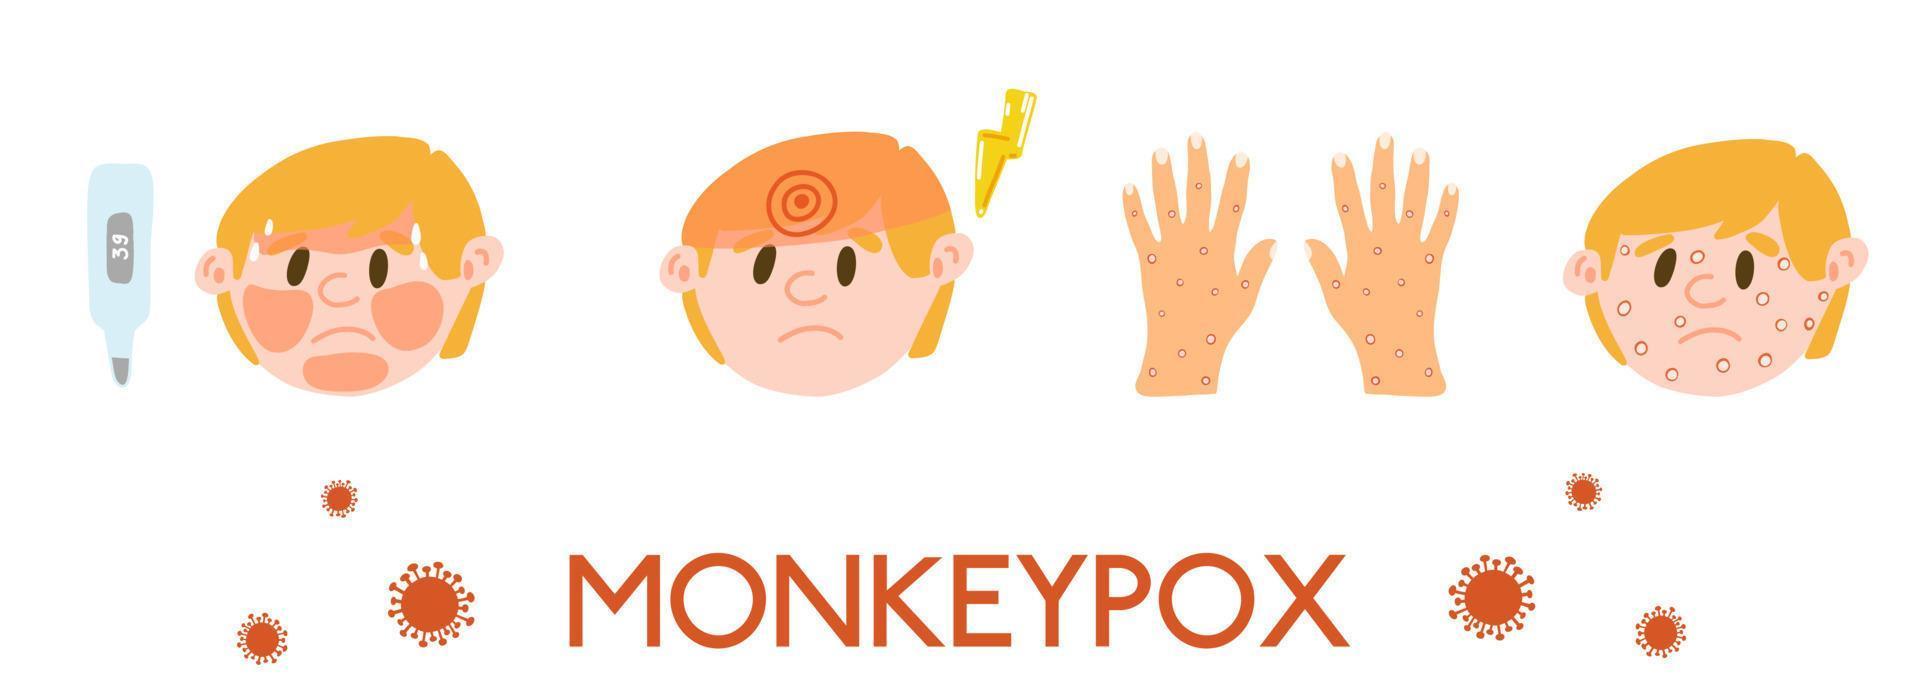 Monkeypox virus symptoms as fever, headache, rash in flat cartoon style. Concept with male face and hands, virus cells on white background. Man with skin disease caused by a virus, chicken pox, acne vector